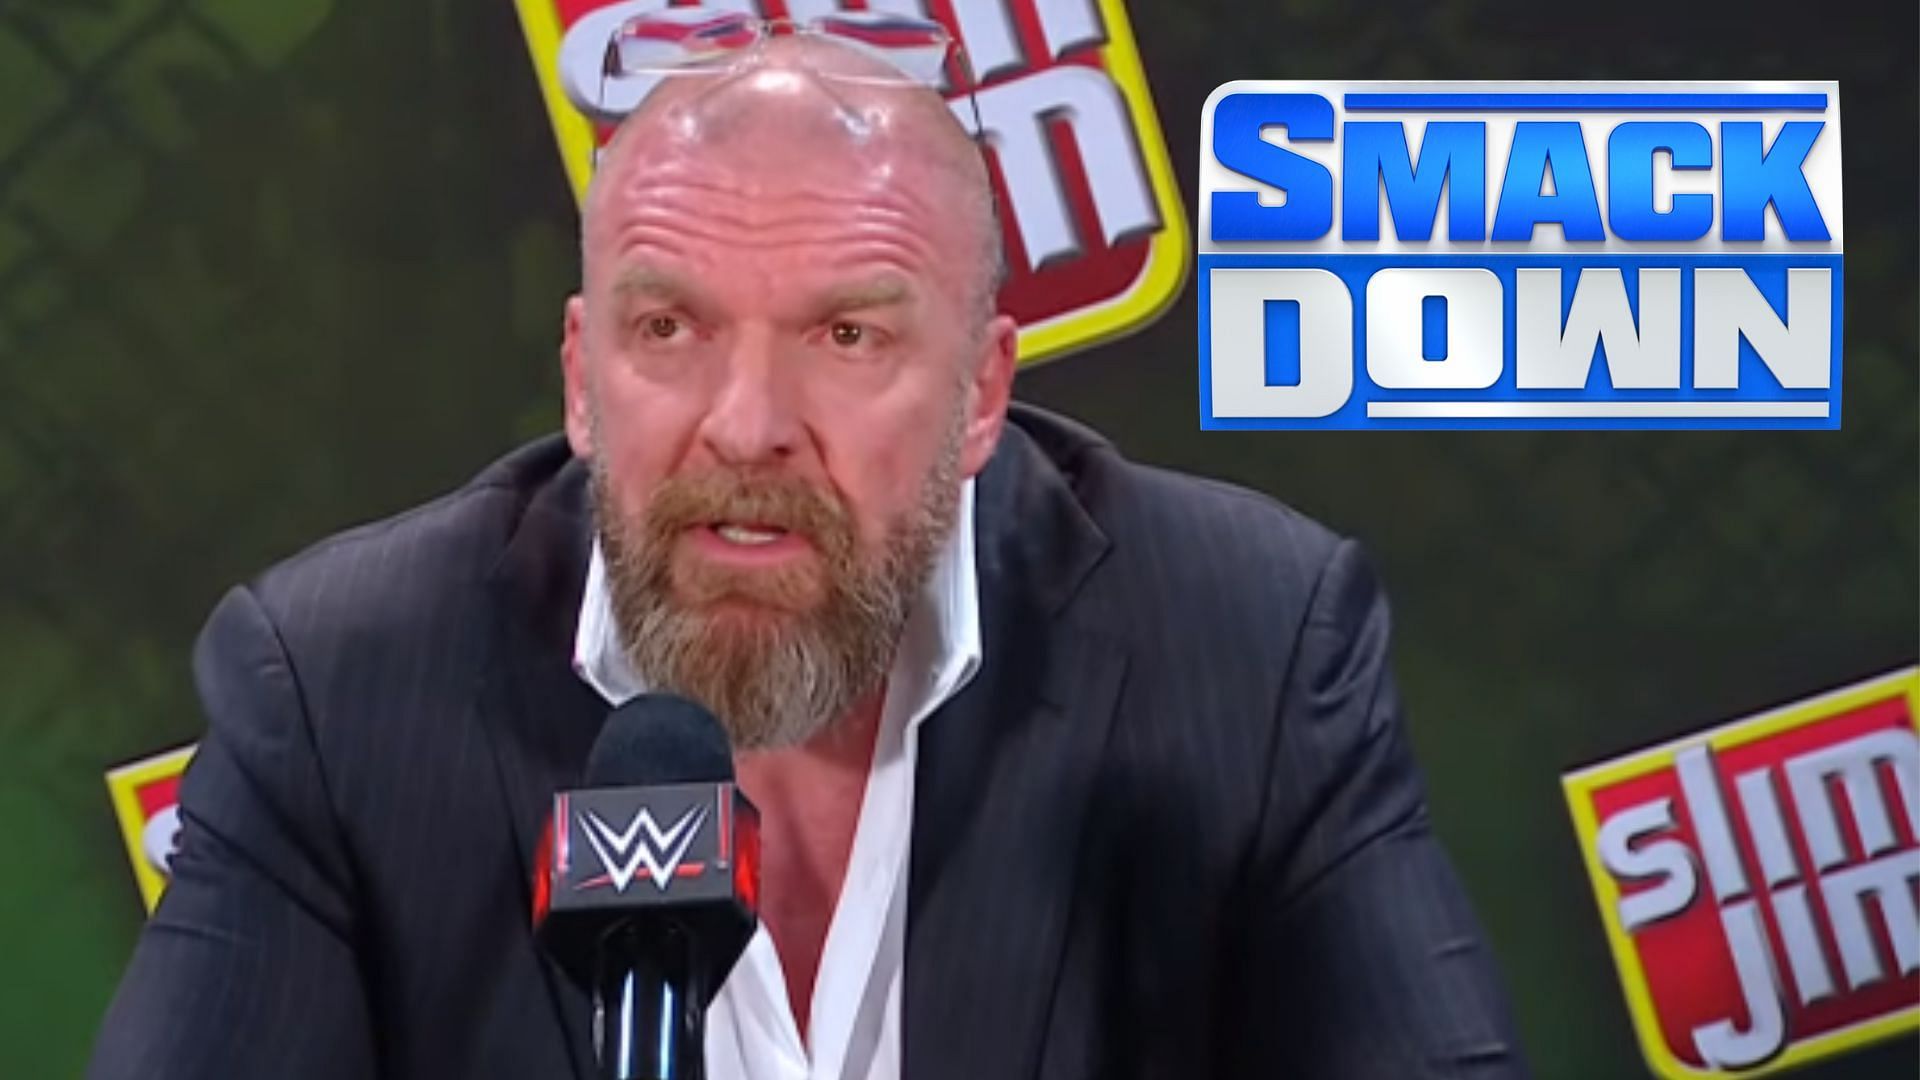 Triple H might havr a plan for SmackDown